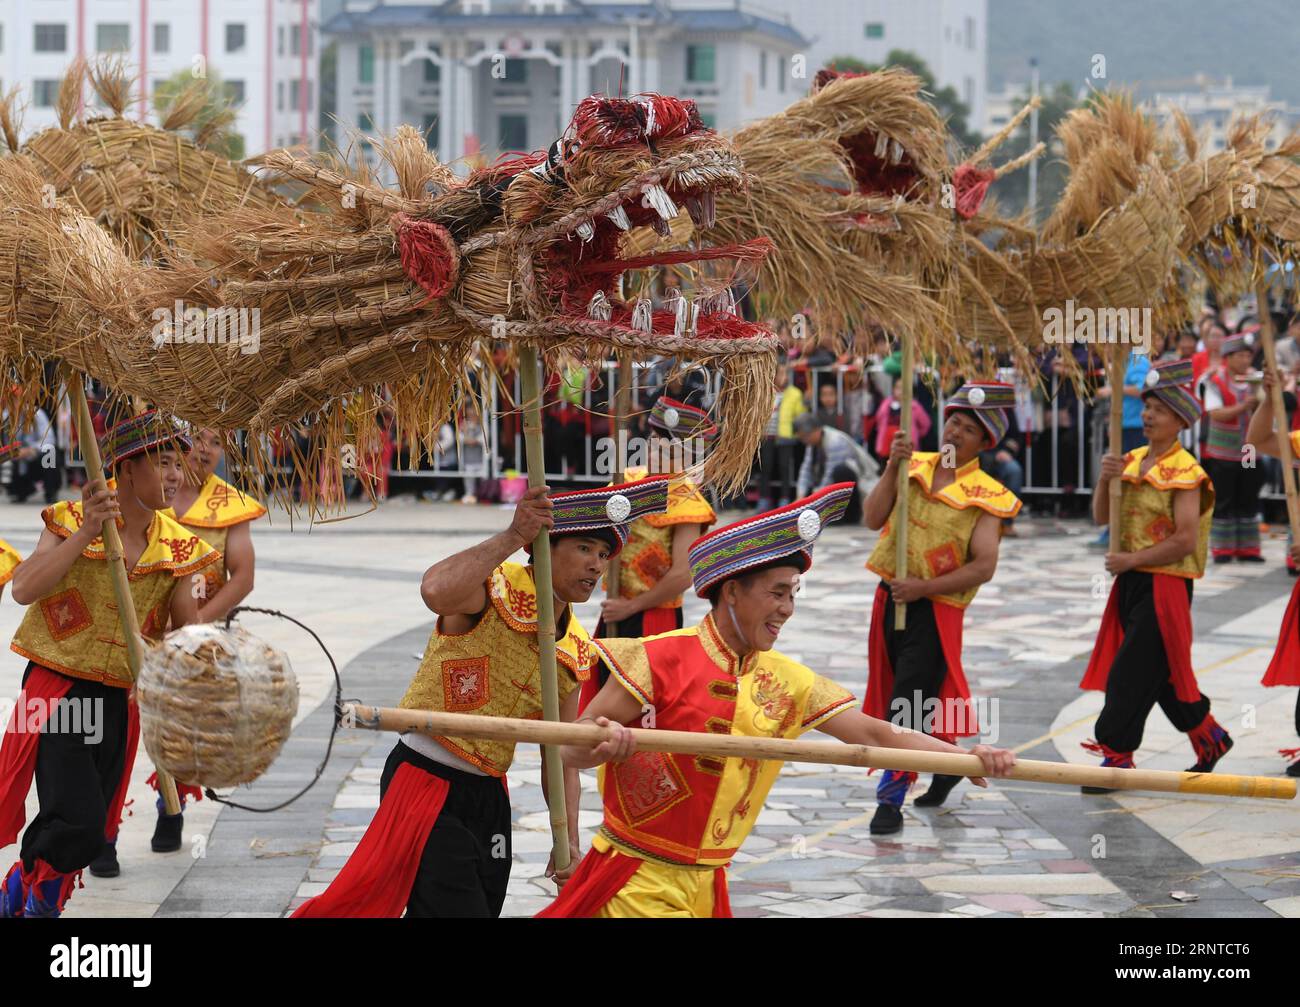 (171106) -- LUOCHENG, Nov. 6, 2017 -- People compete in a competition of grass dragon dance in Mulao Autonomous County of Luocheng, south China s Guangxi Zhuang Autonomous Region, Nov. 6, 2017. Local villagers gathered here to celebrate harvest and pray for good fortune. ) (mp) CHINA-GUANGXI-LUOCHENG-GRASS DRAGON DANCE (CN) LuxBoan PUBLICATIONxNOTxINxCHN Stock Photo